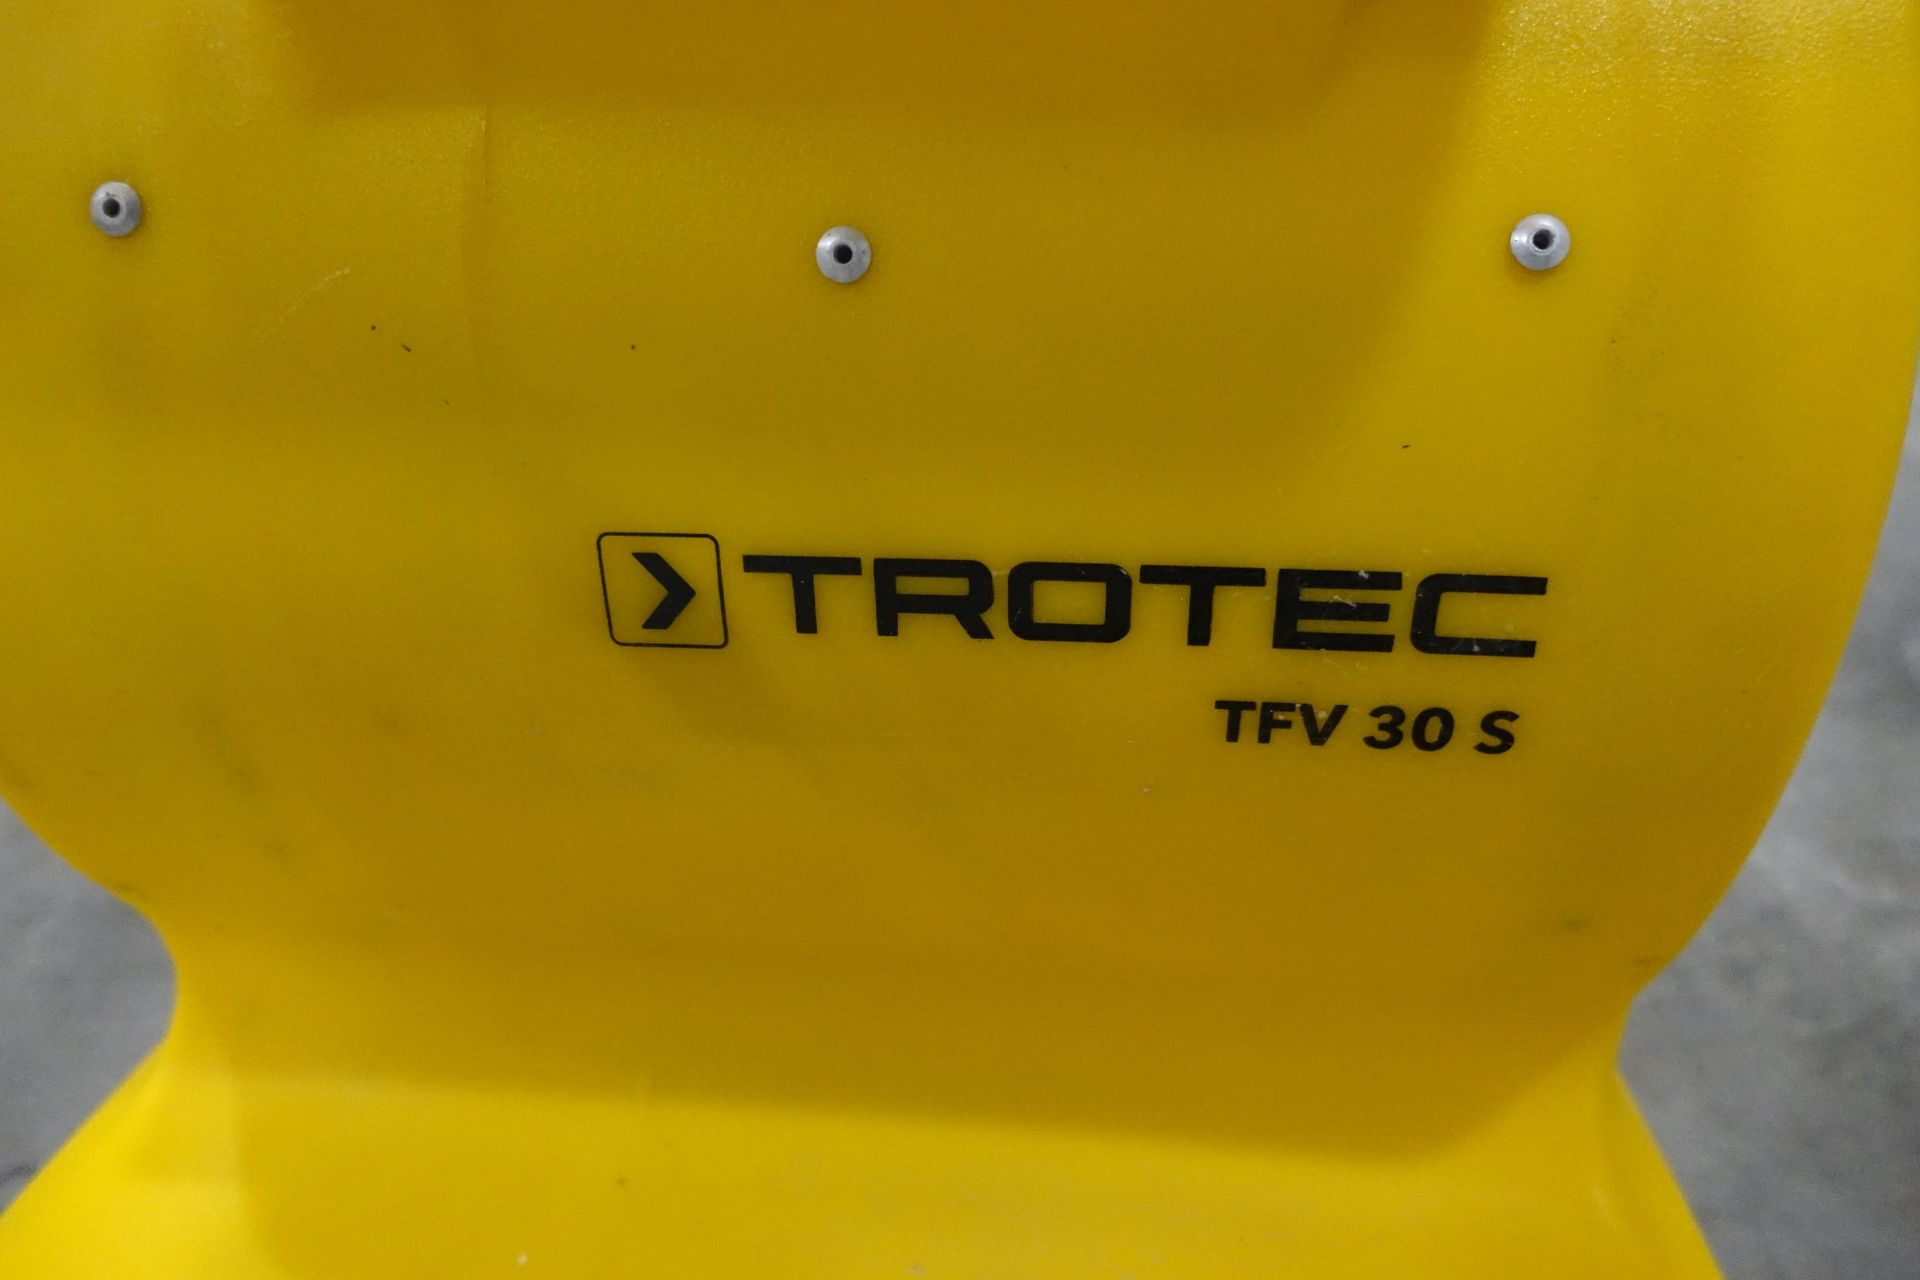 Qty 3 x Trotec TFV 30 S Turbo Fans - Image 4 of 10